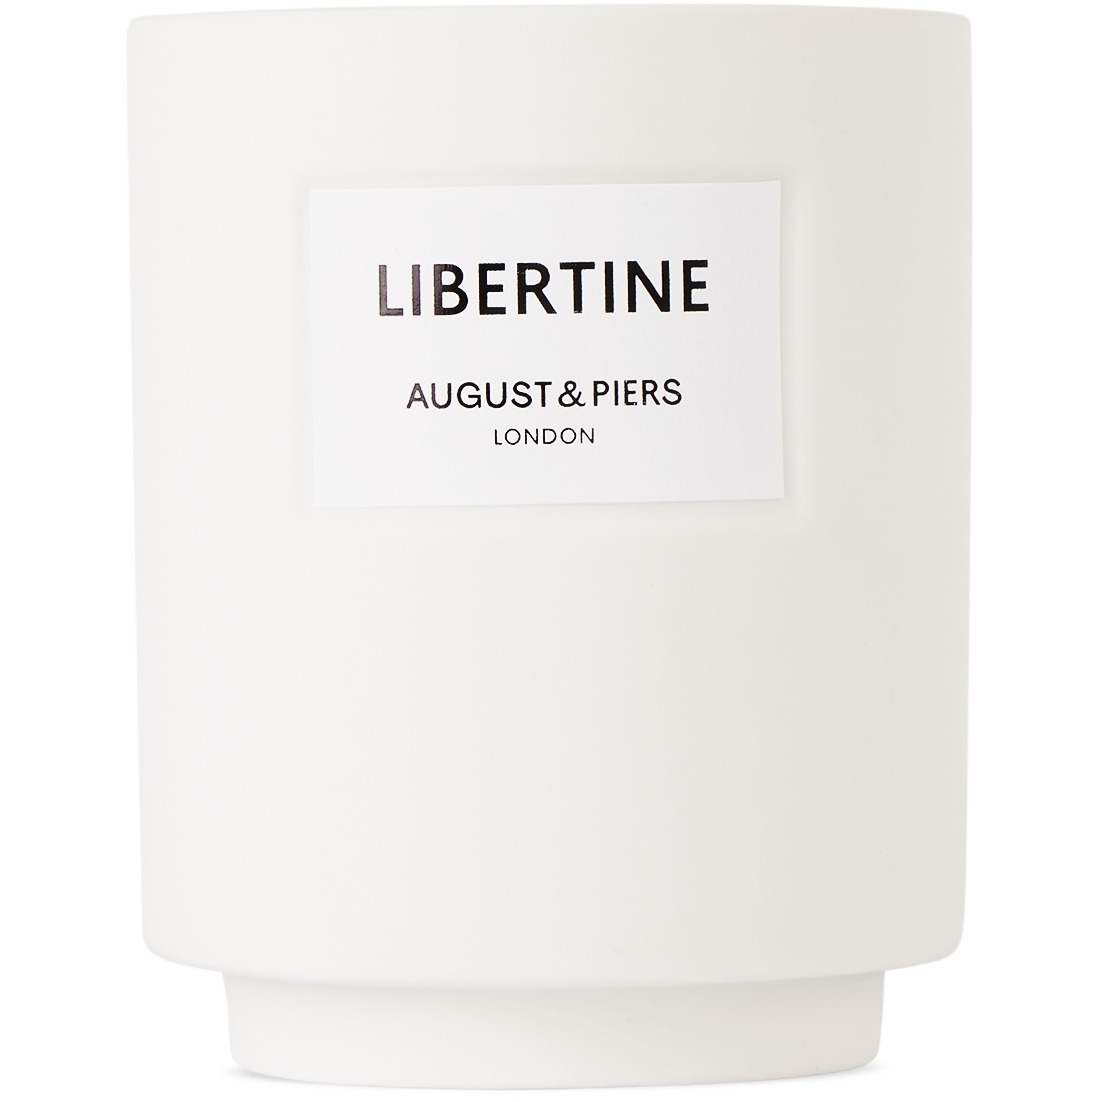 AUGUST&PIERS Libertine Candle, 12 oz - image 1